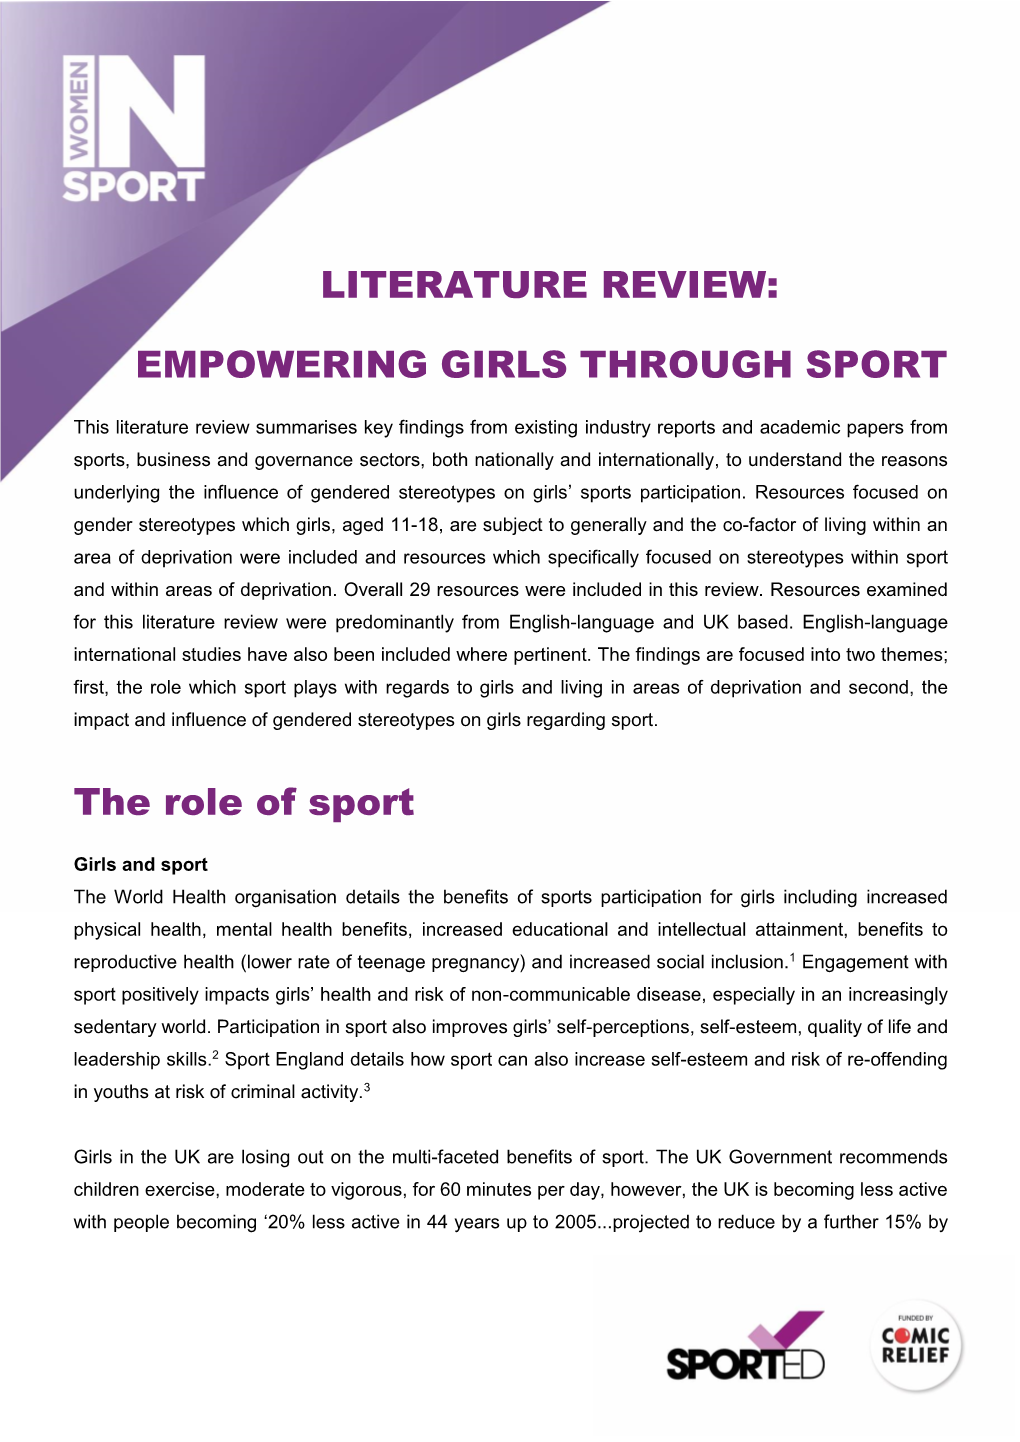 LITERATURE REVIEW: EMPOWERING GIRLS THROUGH SPORT the Role of Sport